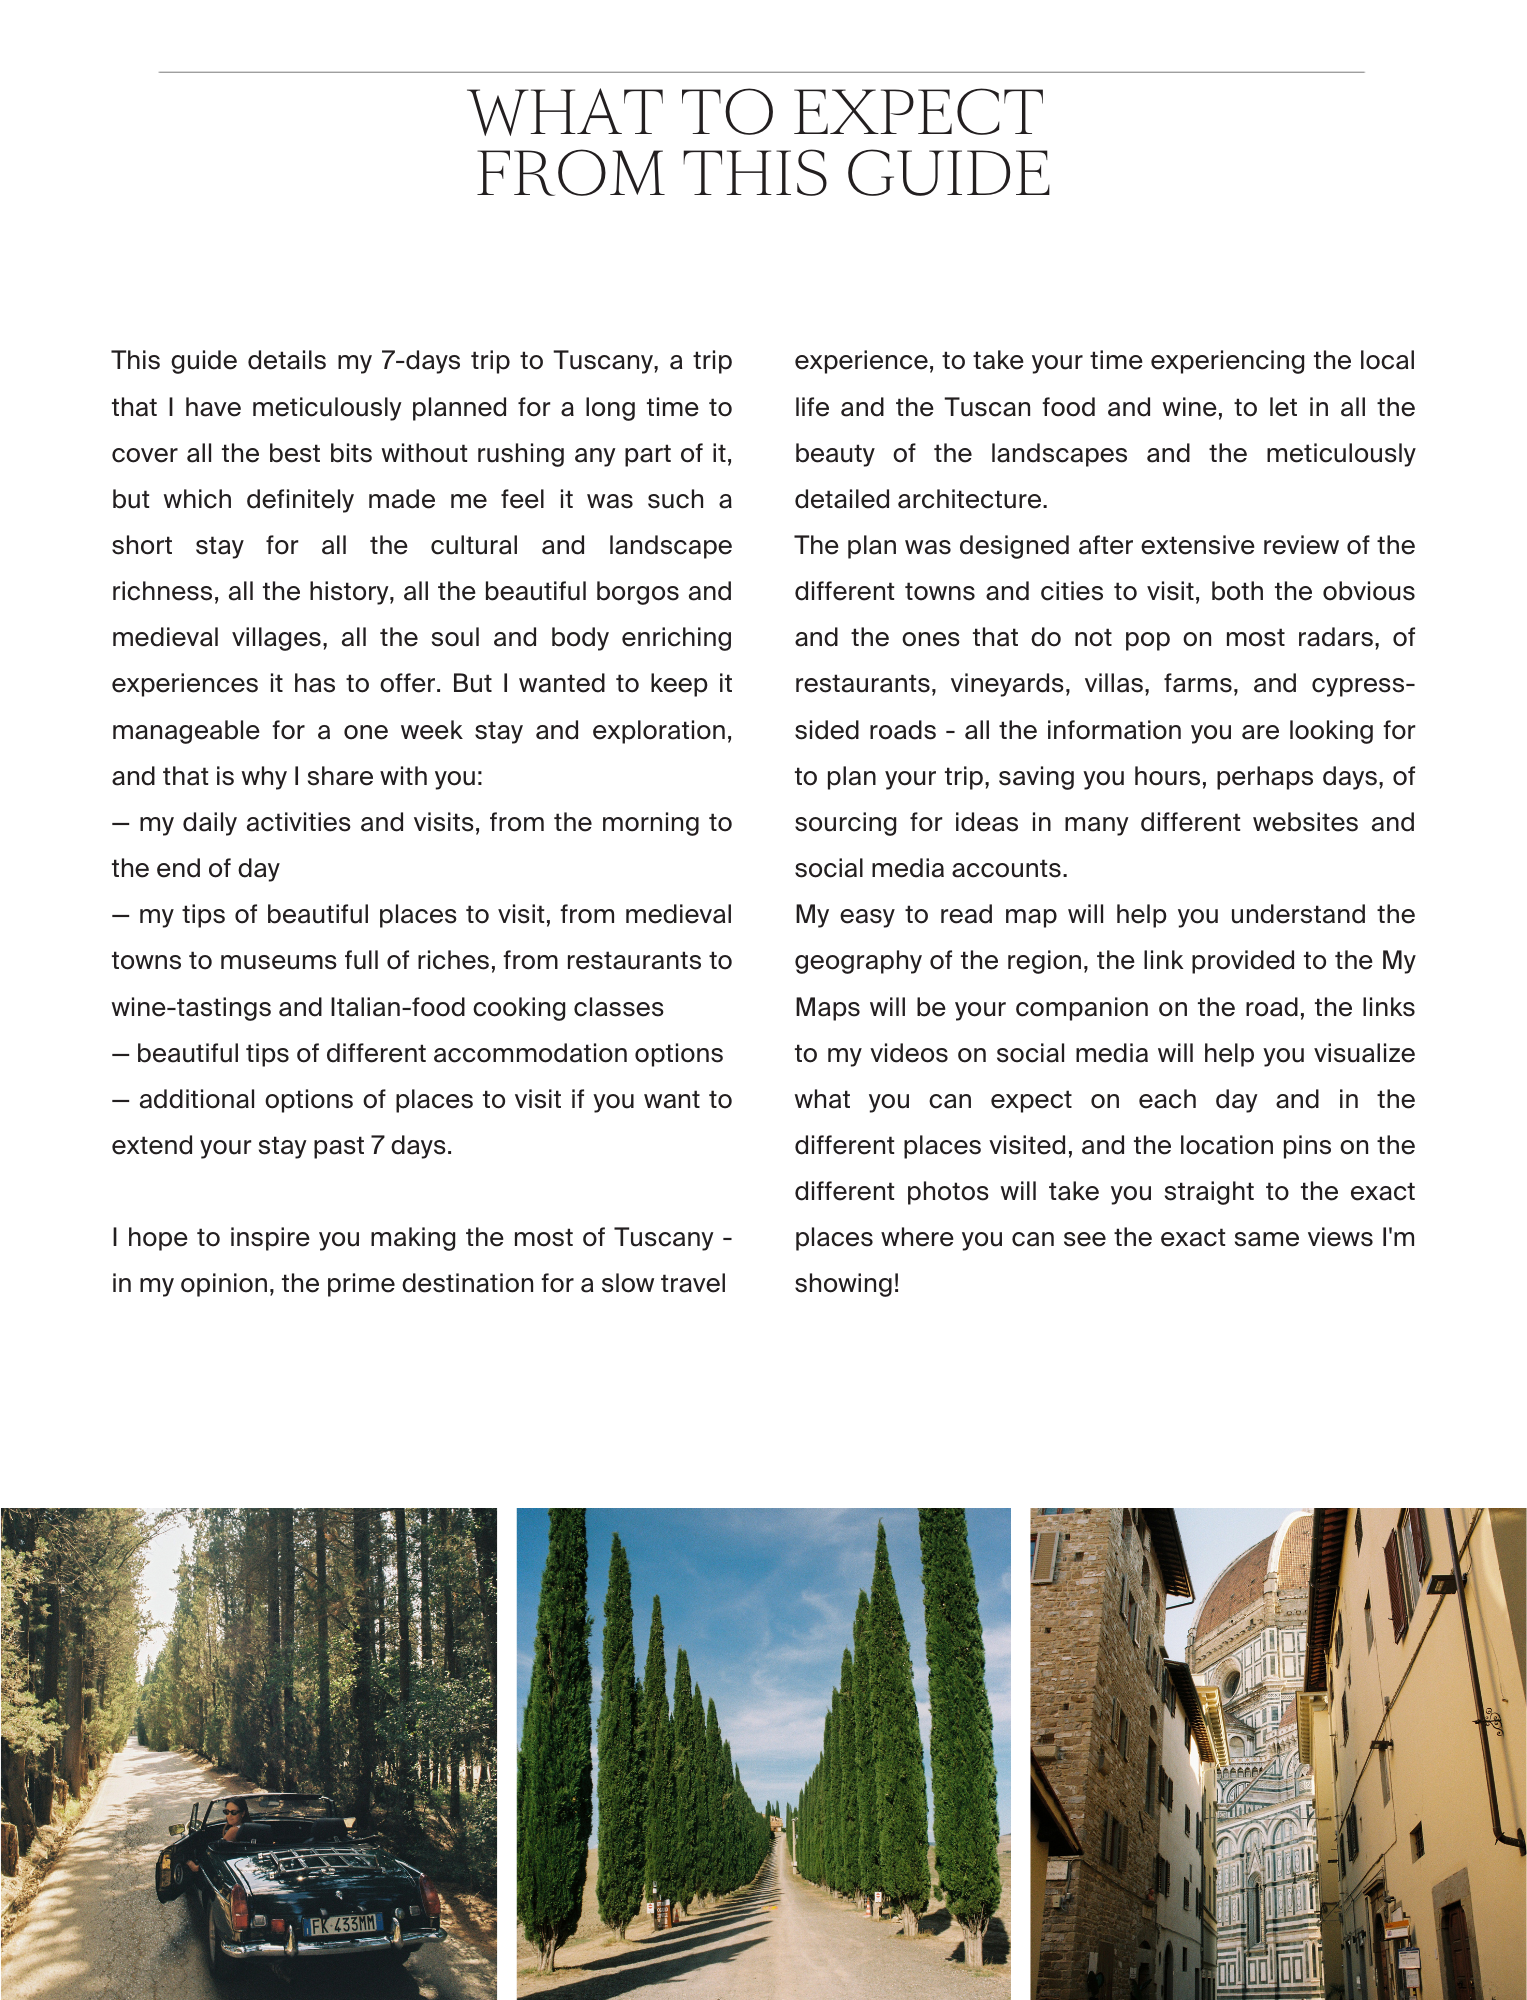 A Guide to Tuscany - the 'What to Expect' page, by Simply Slow Traveler